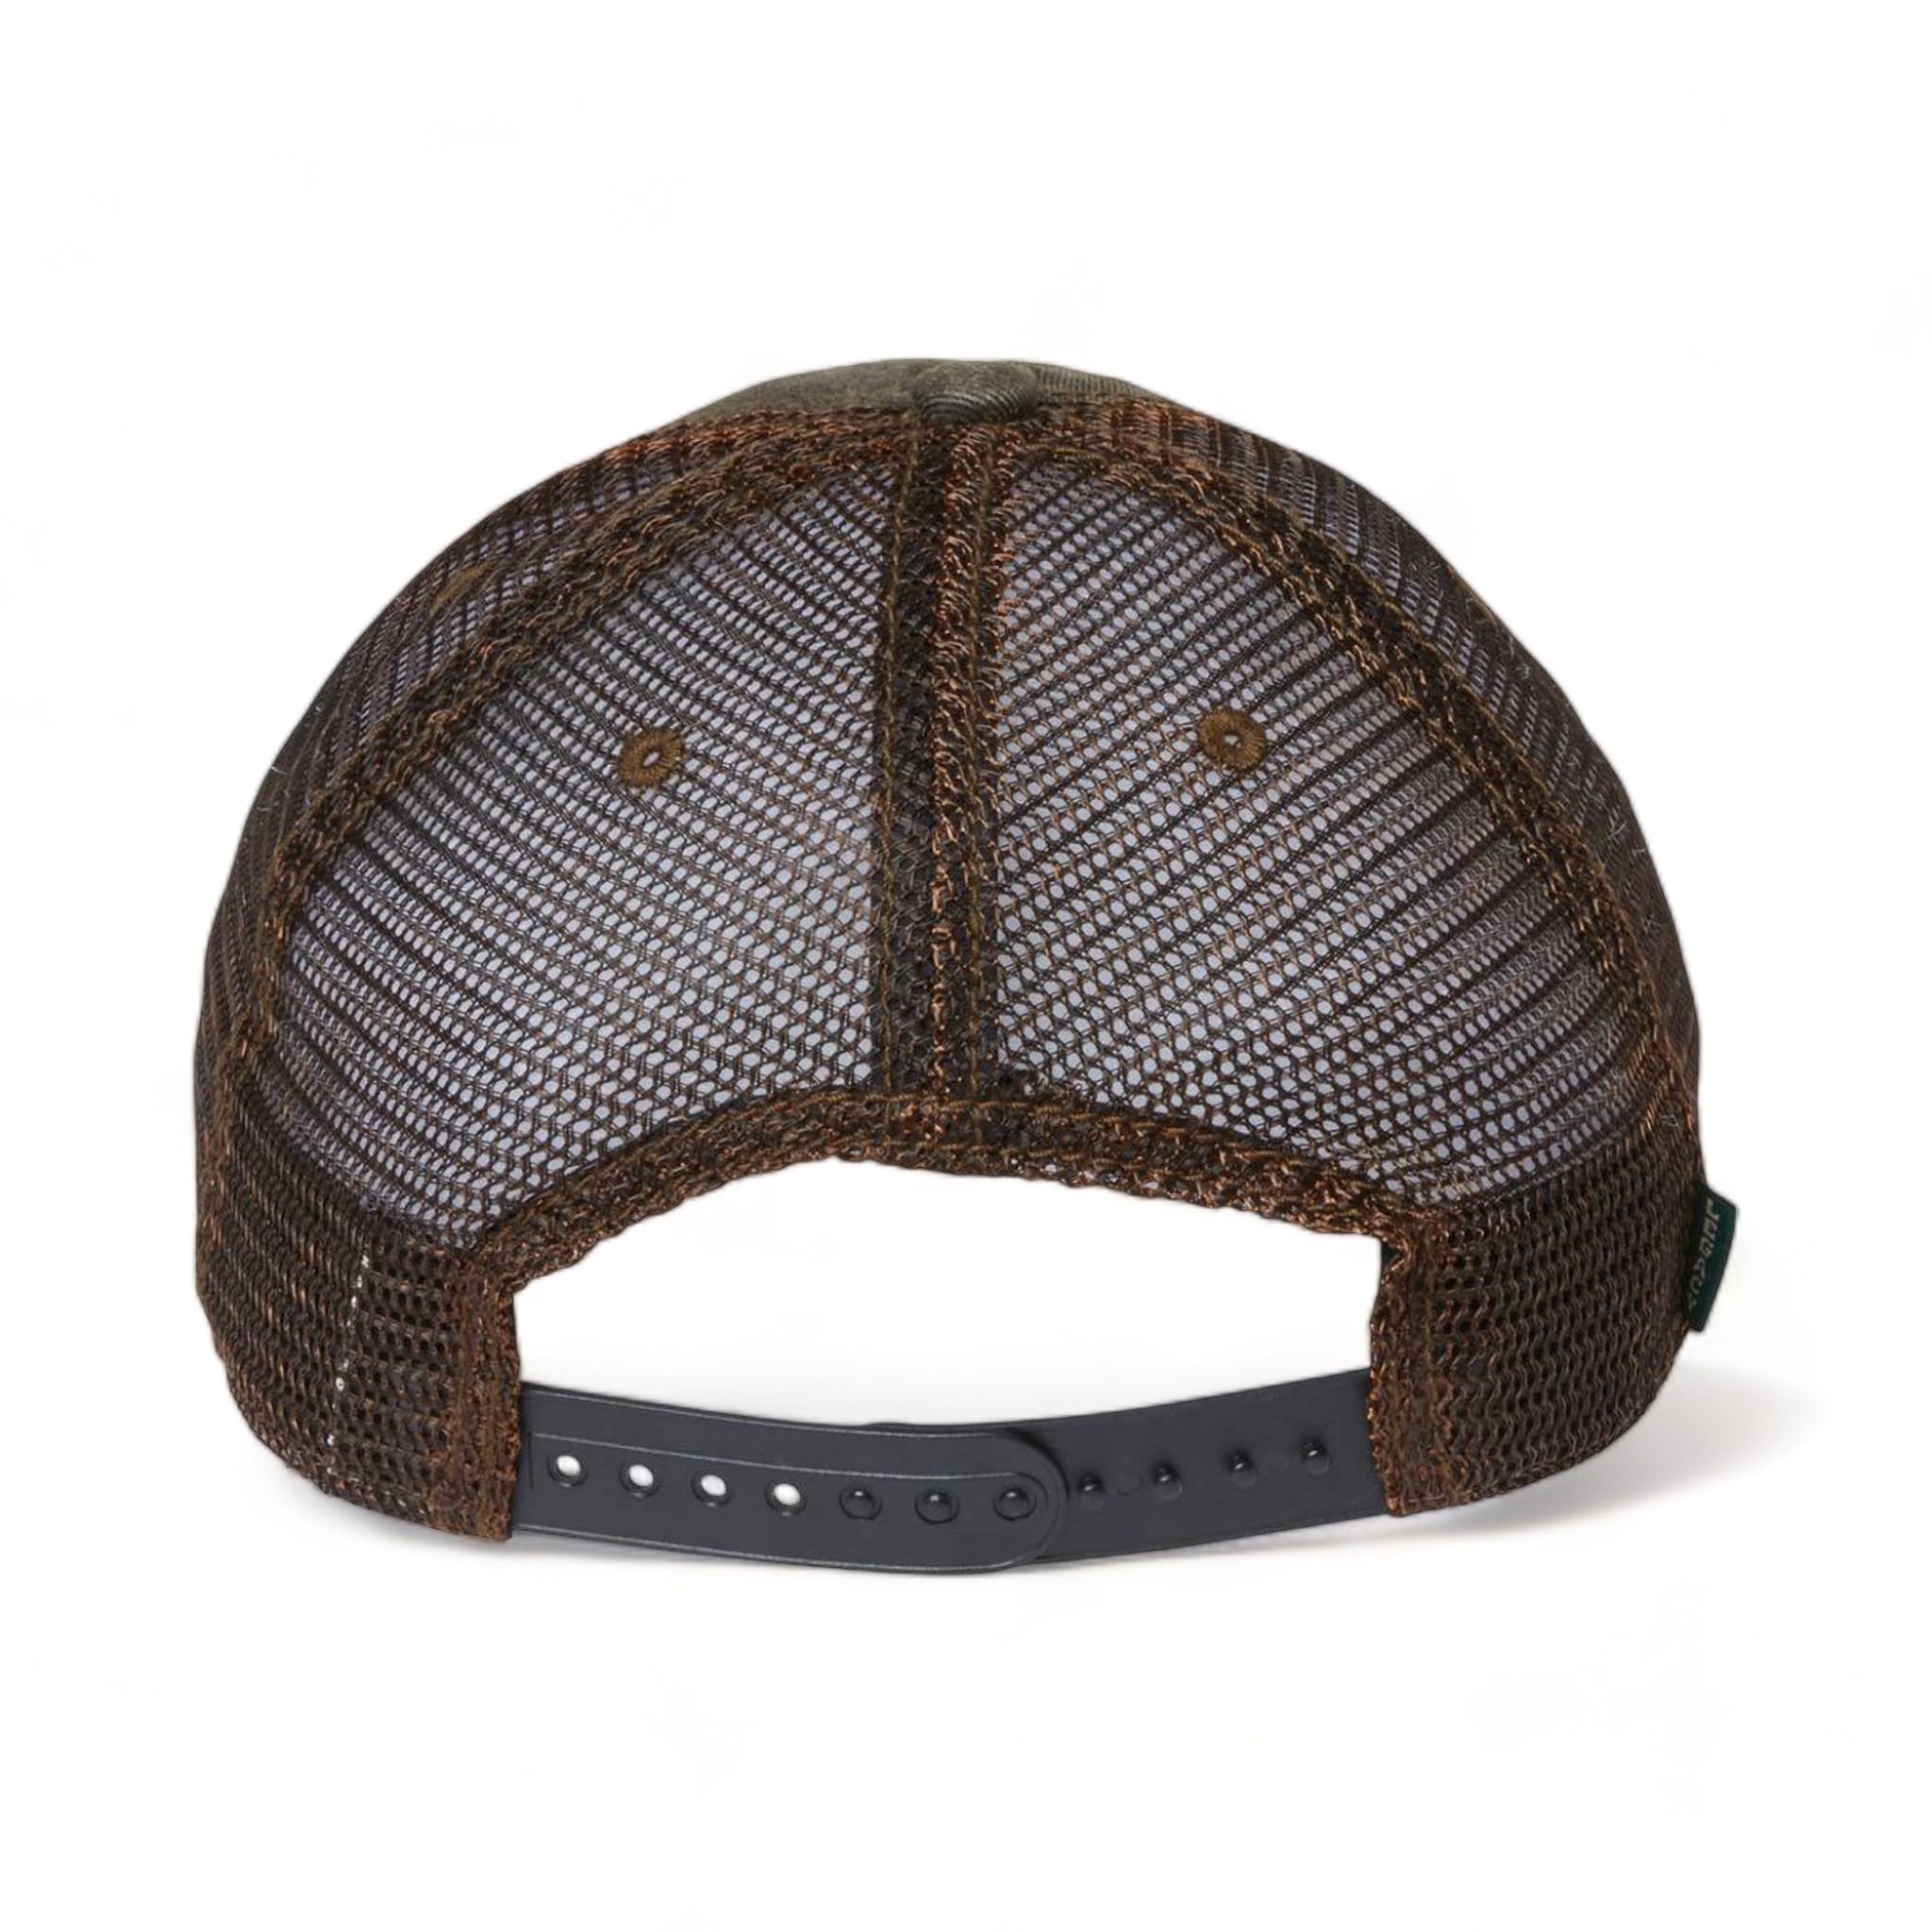 Back view of LEGACY OFA custom hat in black and brown